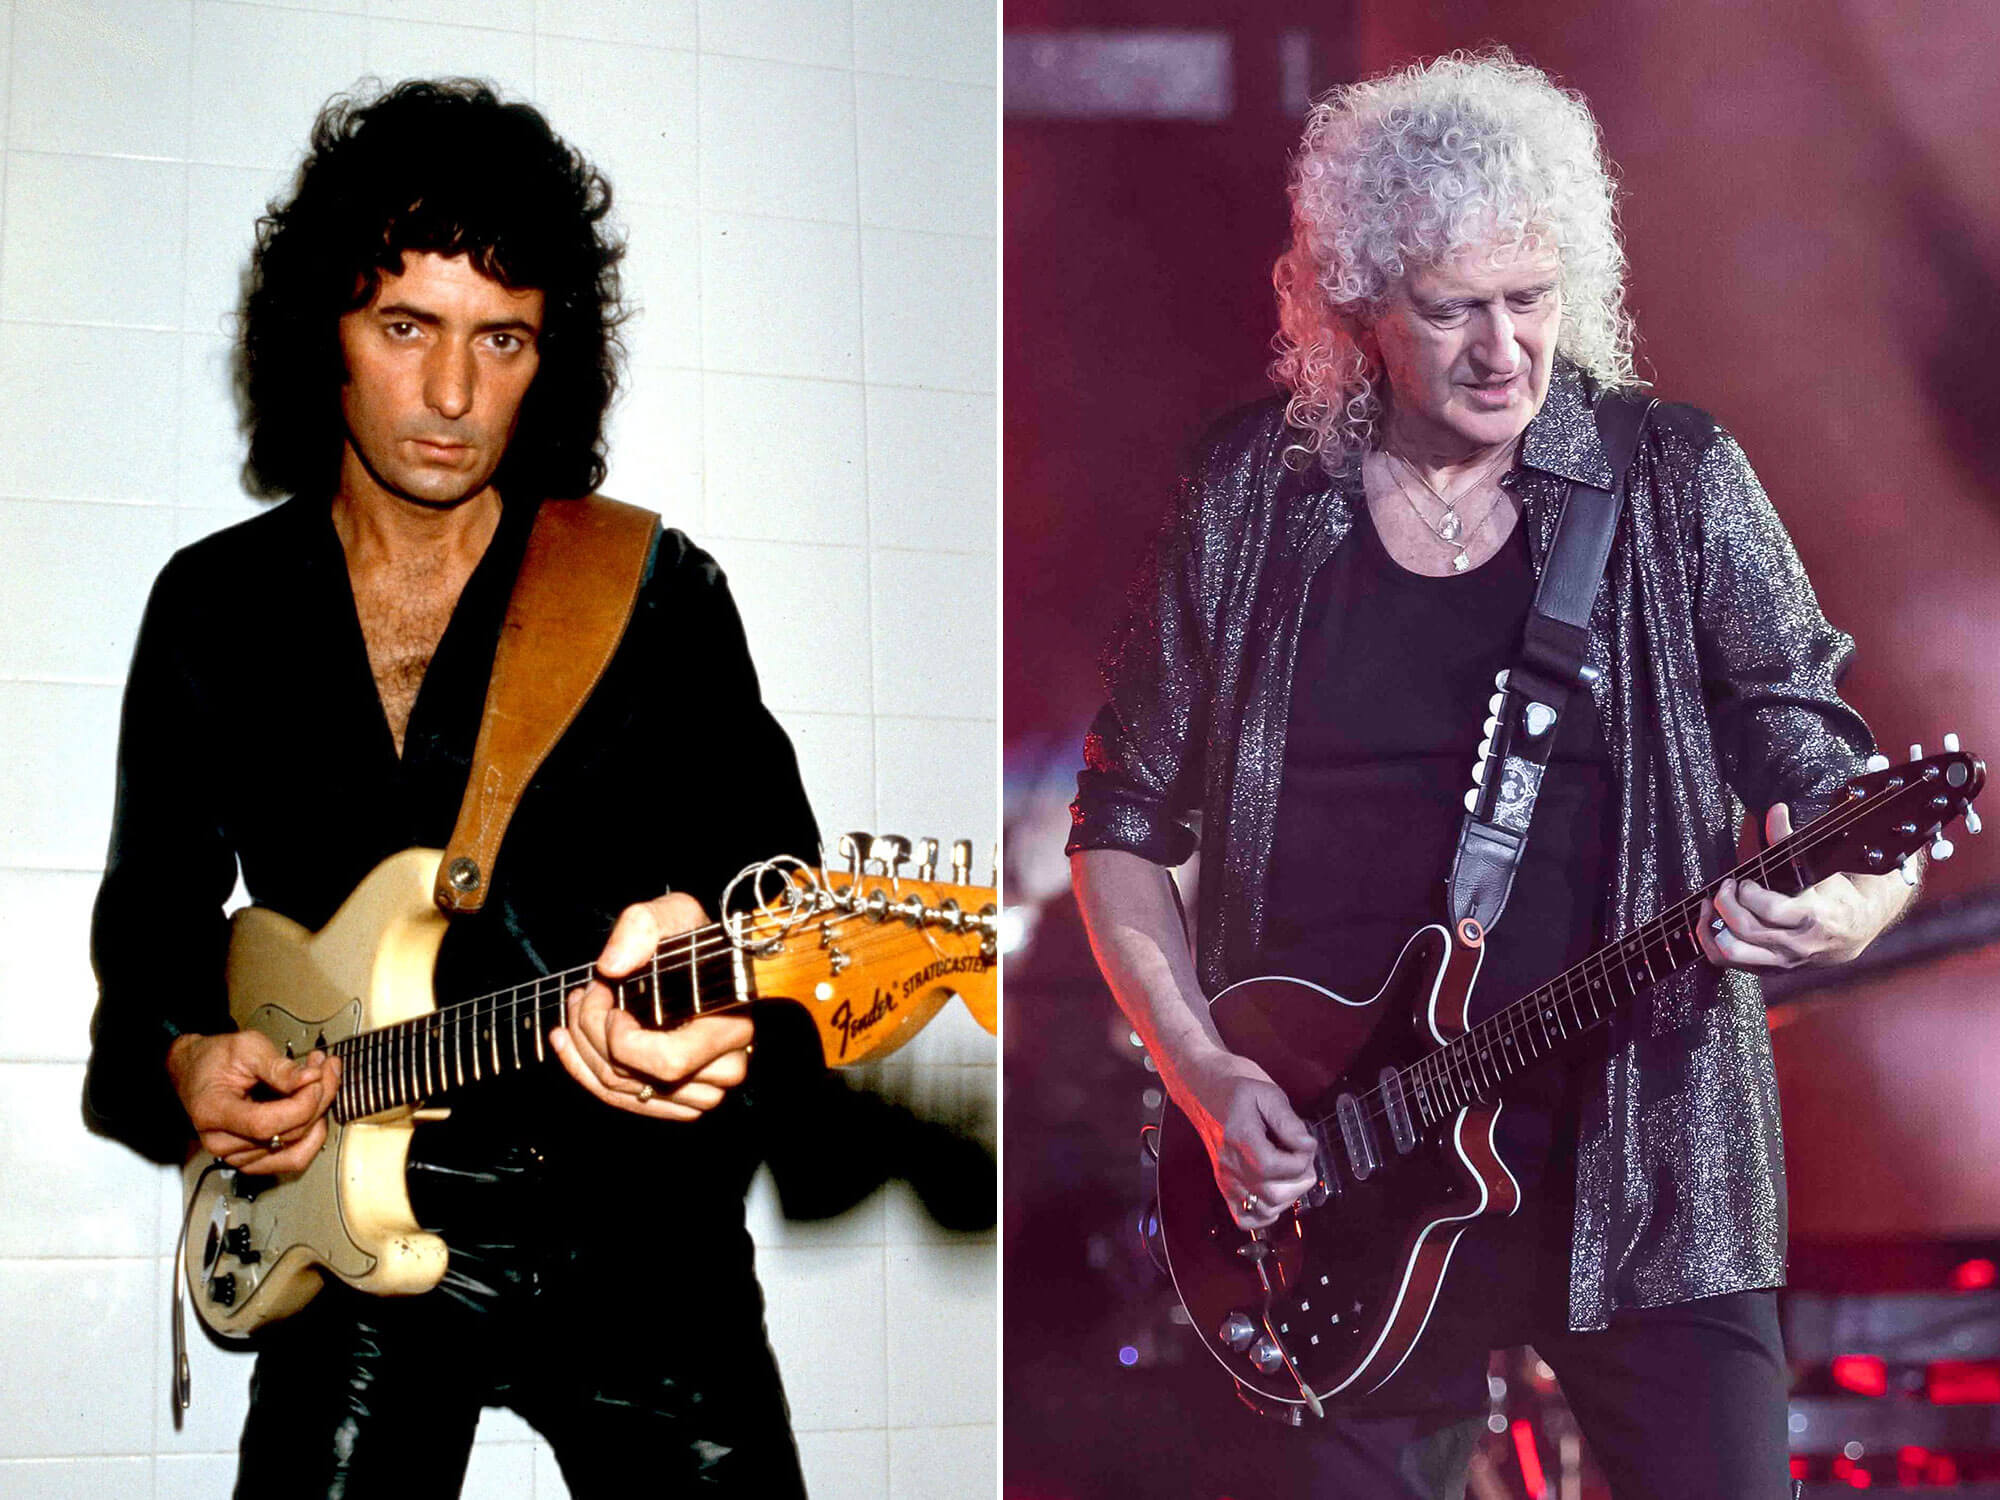 [L-R] Ritchie Blackmore and Brian May